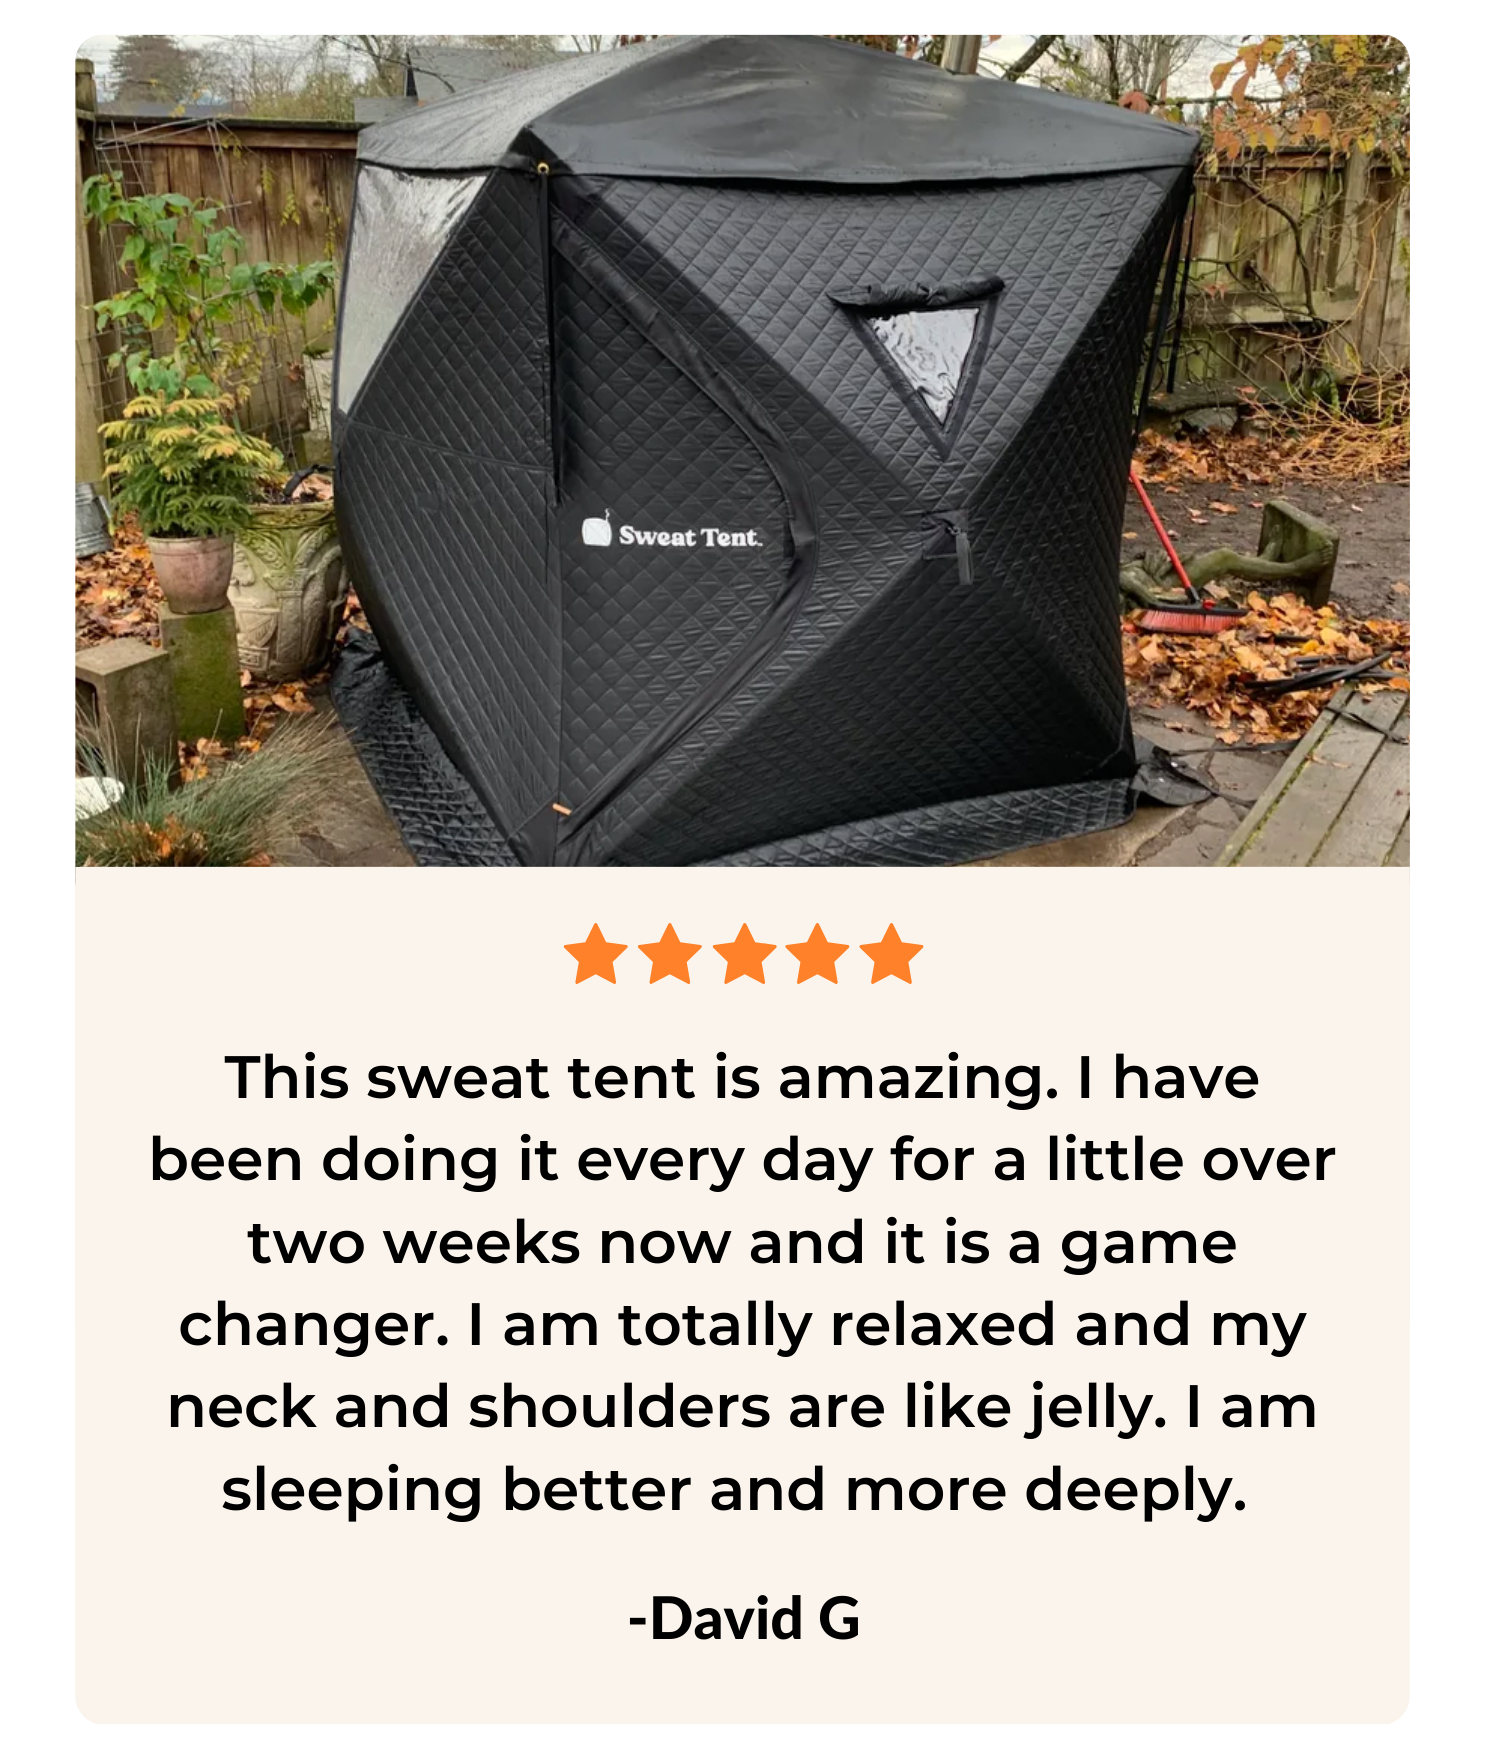 Sweat Tent review "this is amazing, I've been using it every day for over two weeks now."